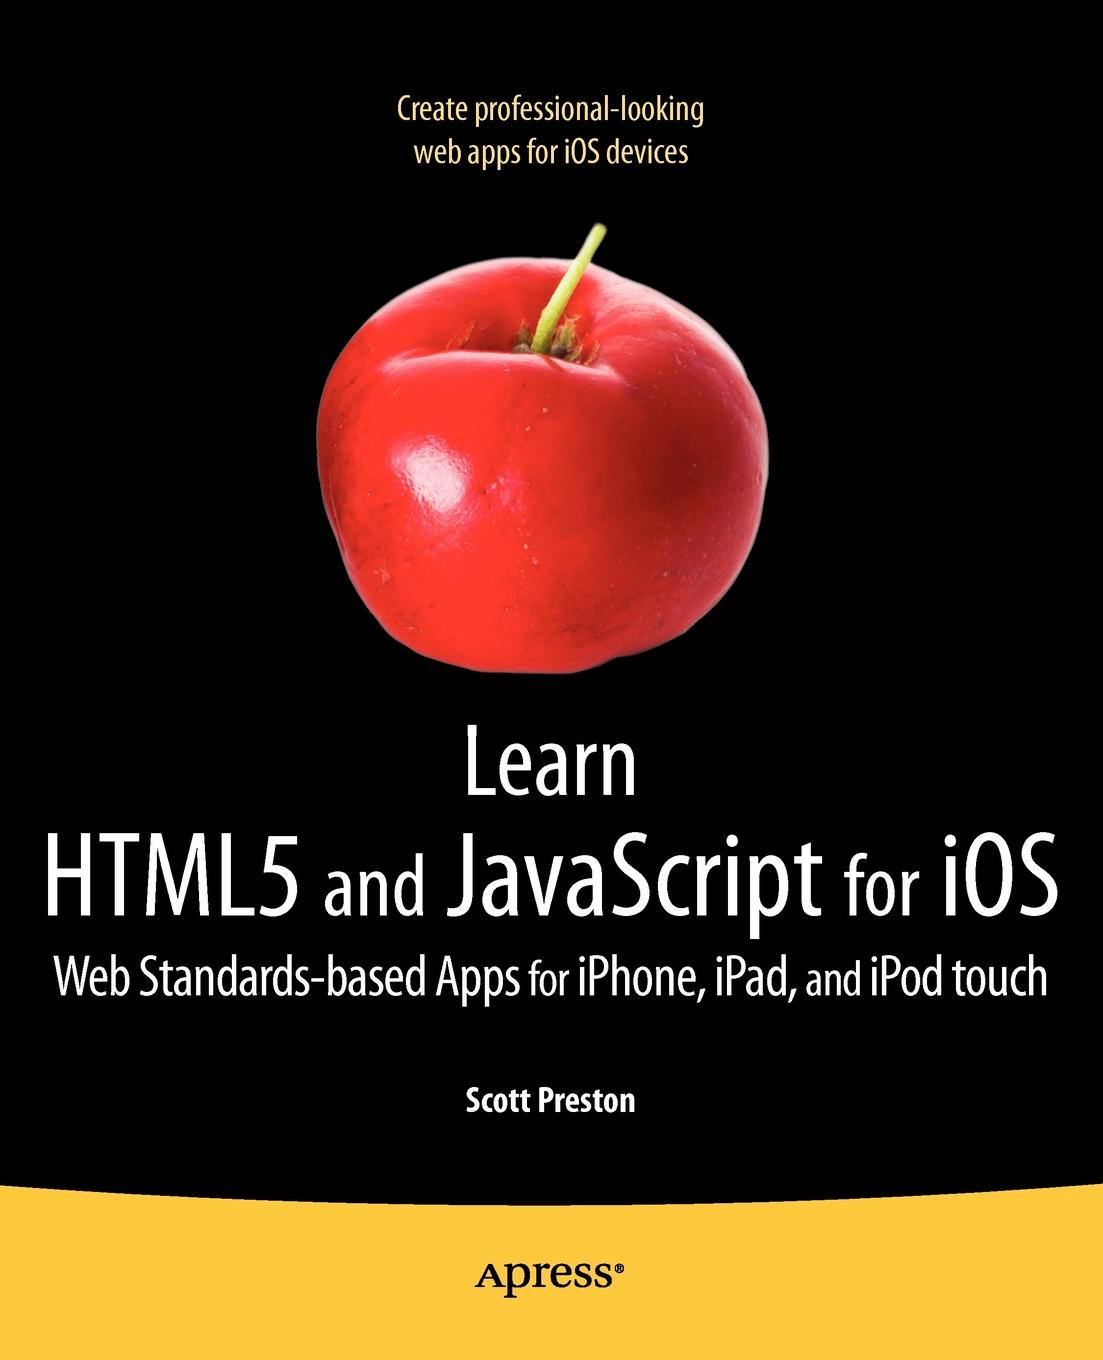 Learn Html5 and JavaScript for IOS. Web Standards-Based Apps for iPhone, iPad, and iPod Touch